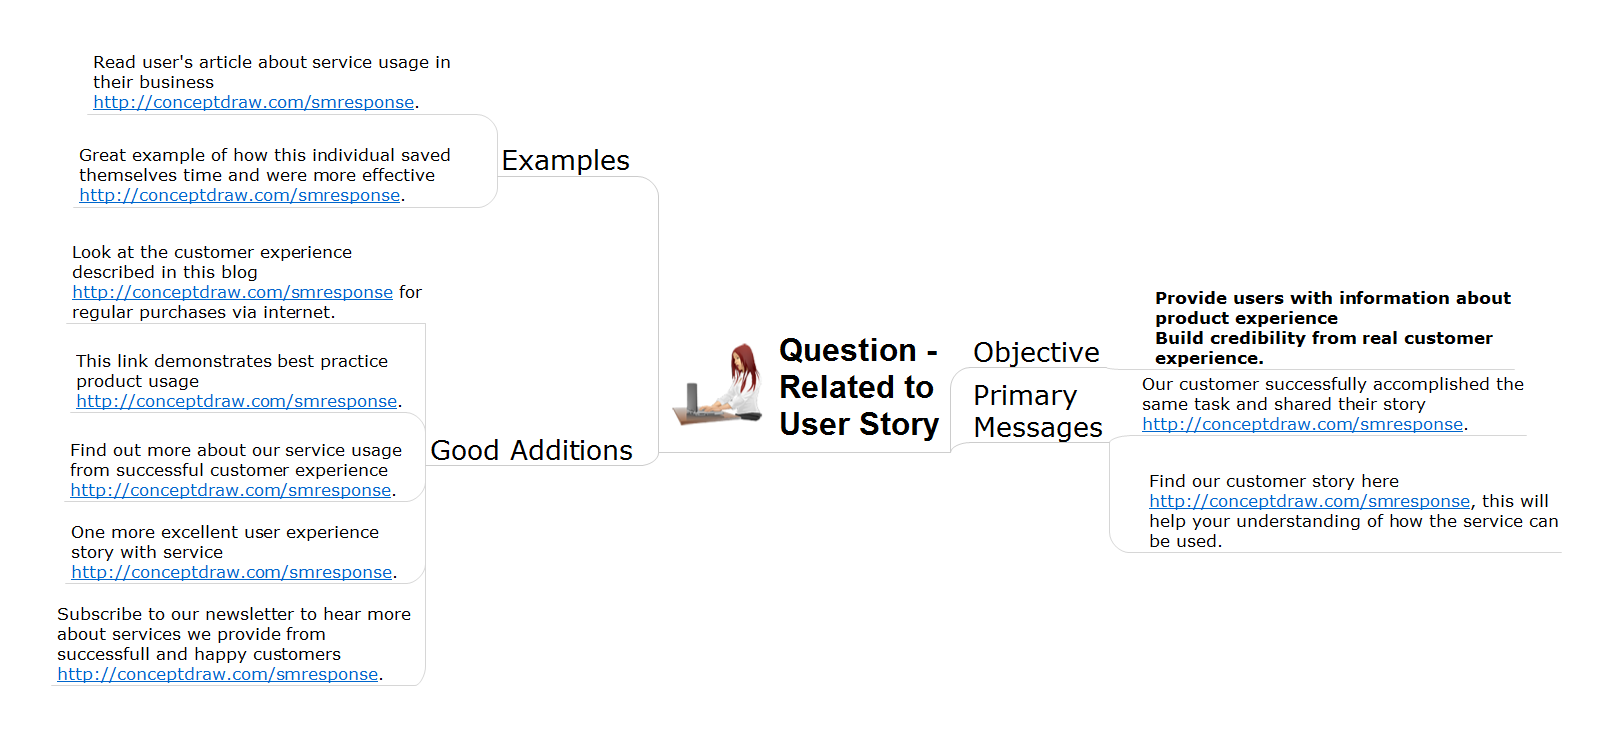 Action mind map - Address to user story question